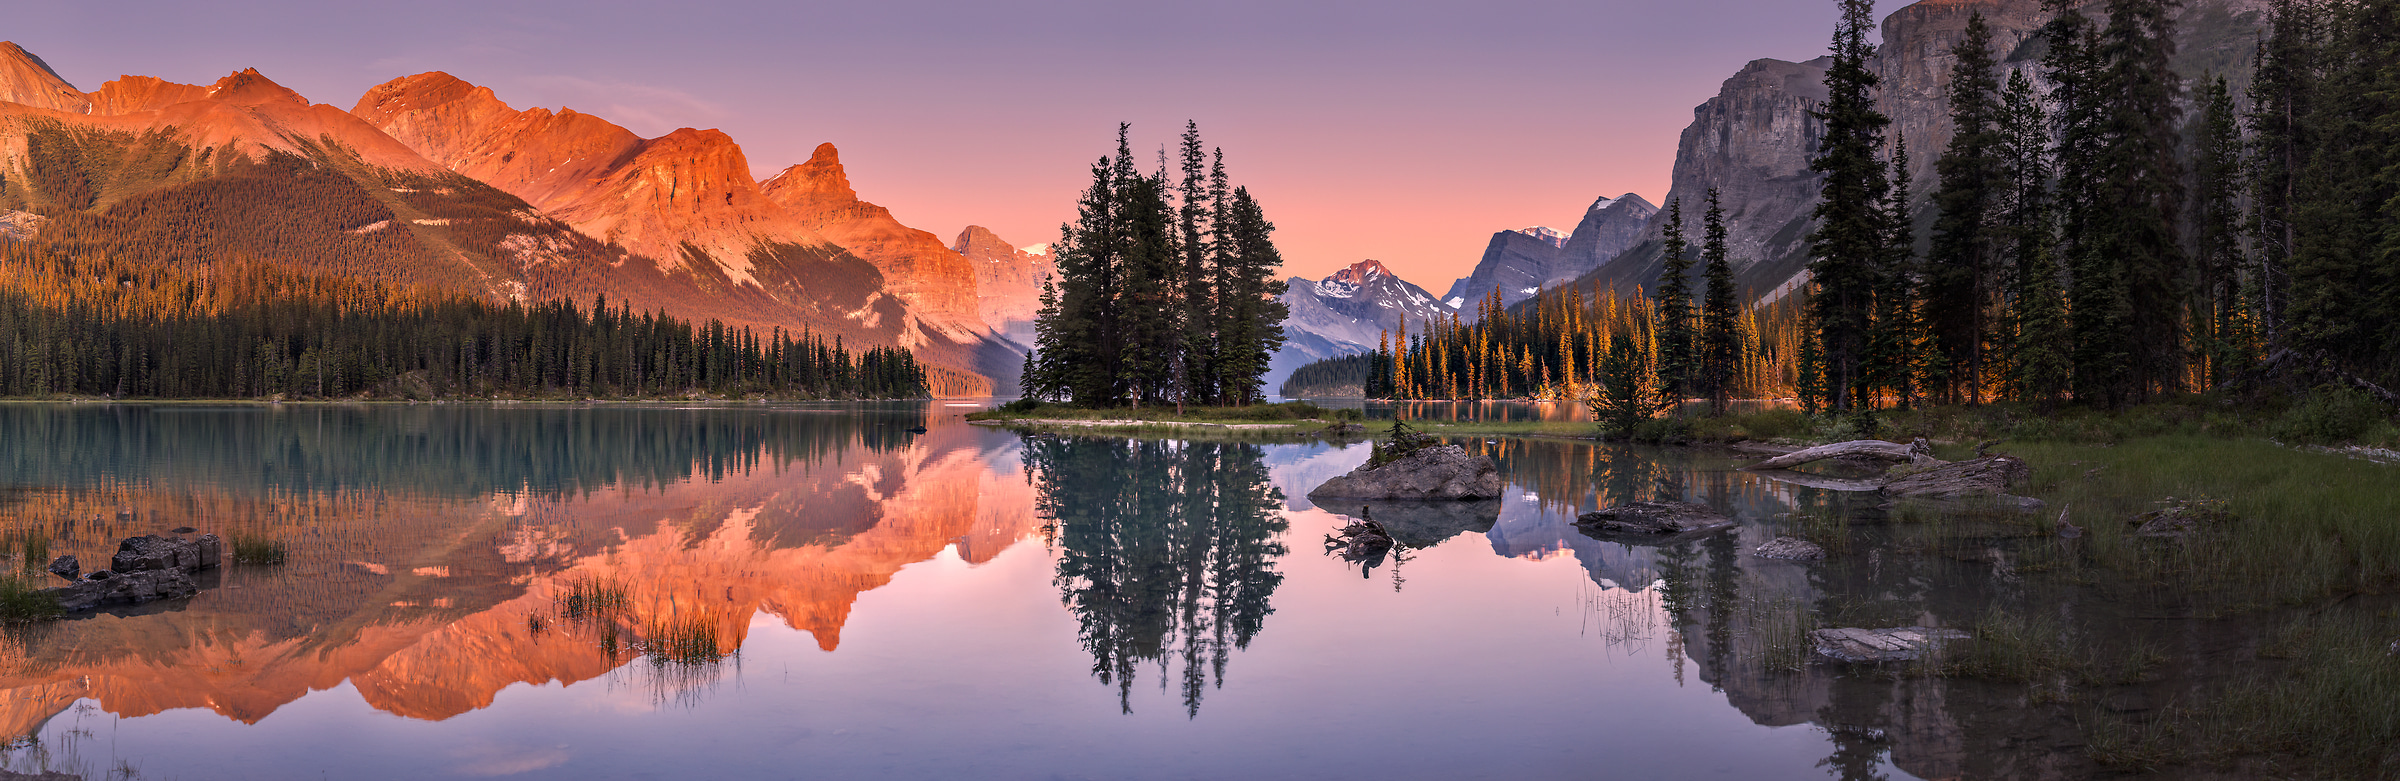 164 megapixels! A very high resolution, large-format VAST photo print of a peaceful landscape with mountains, trees, and a lake; nature photograph created by Chris Collacott in Spirit Island, Jasper National Park, Alberta, Canada